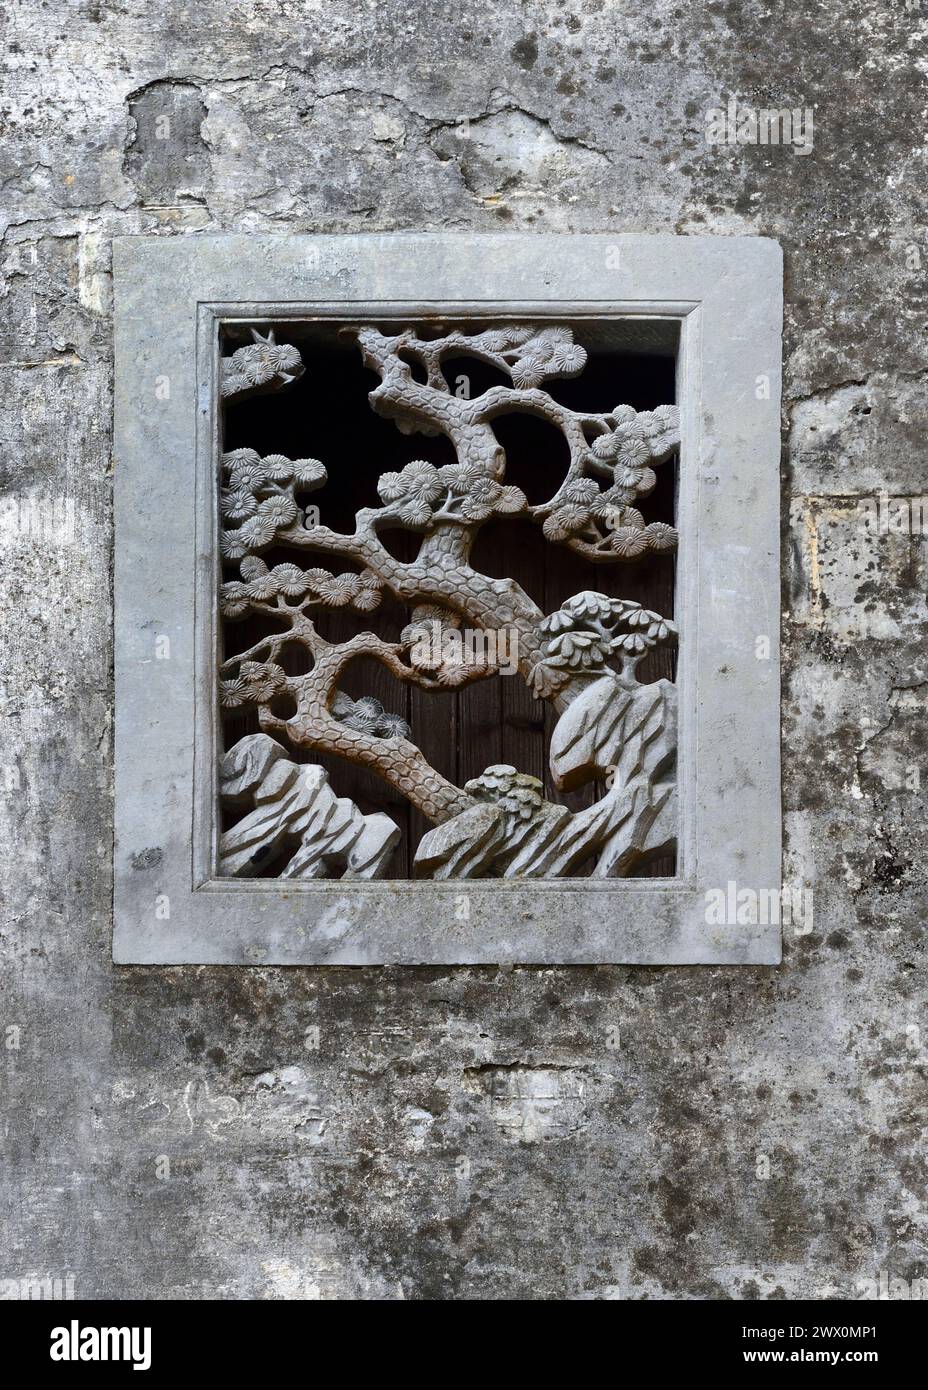 A stone carving cut-out creates a small, decorative window in a rock wall in Xidi Ancient Town. Stock Photo